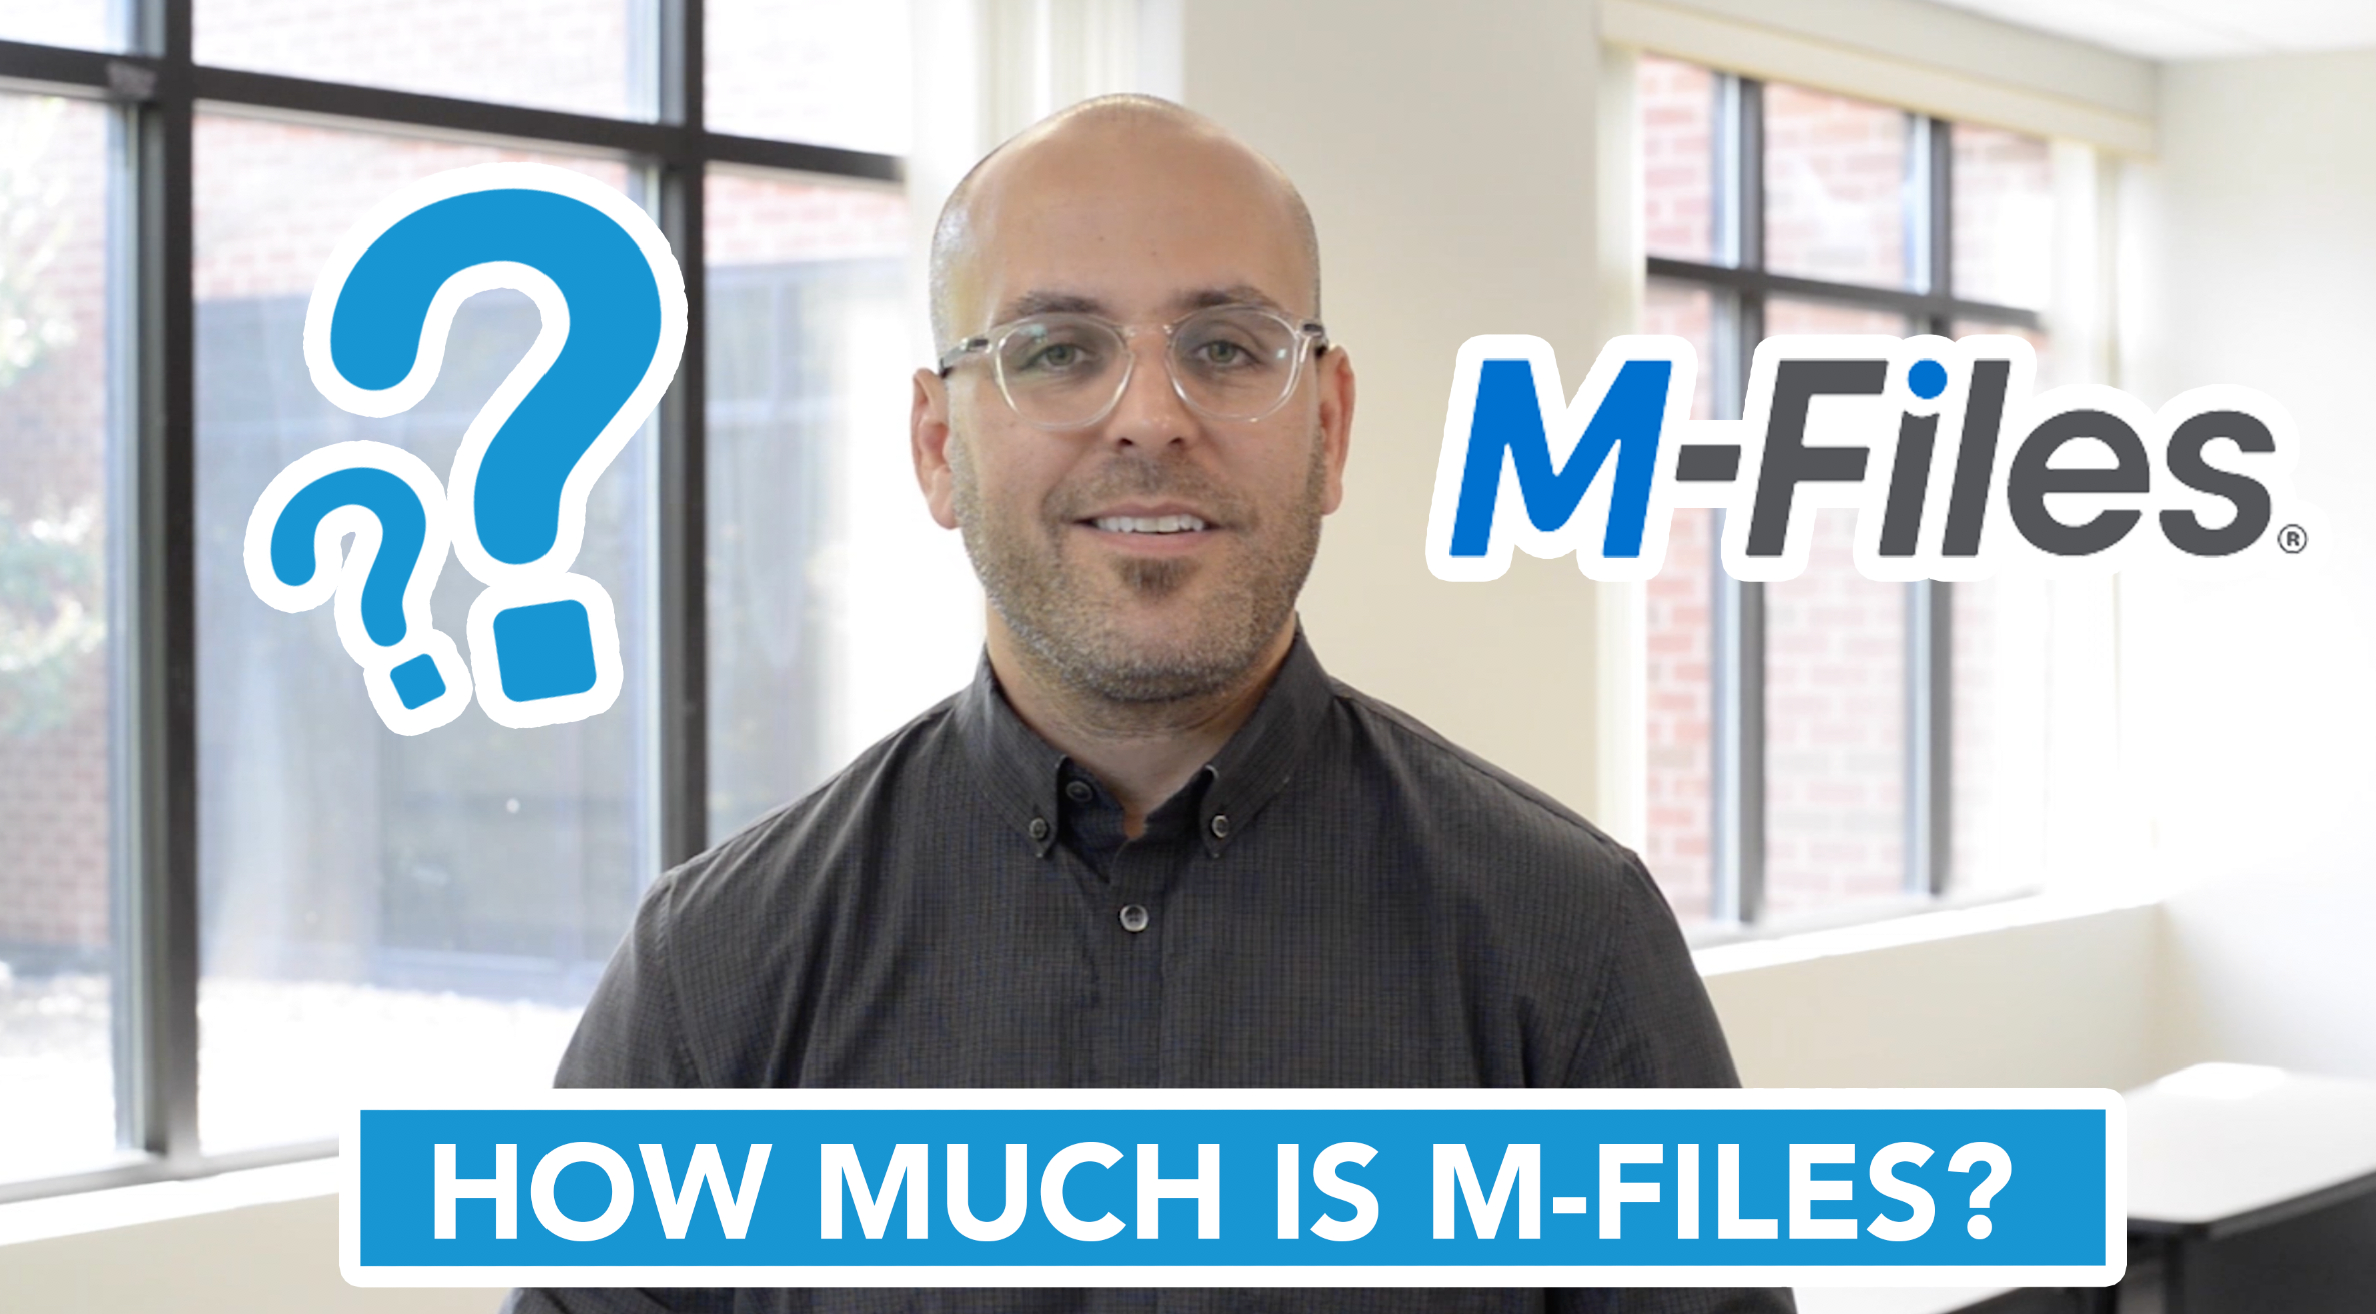 How Much is M-Files?